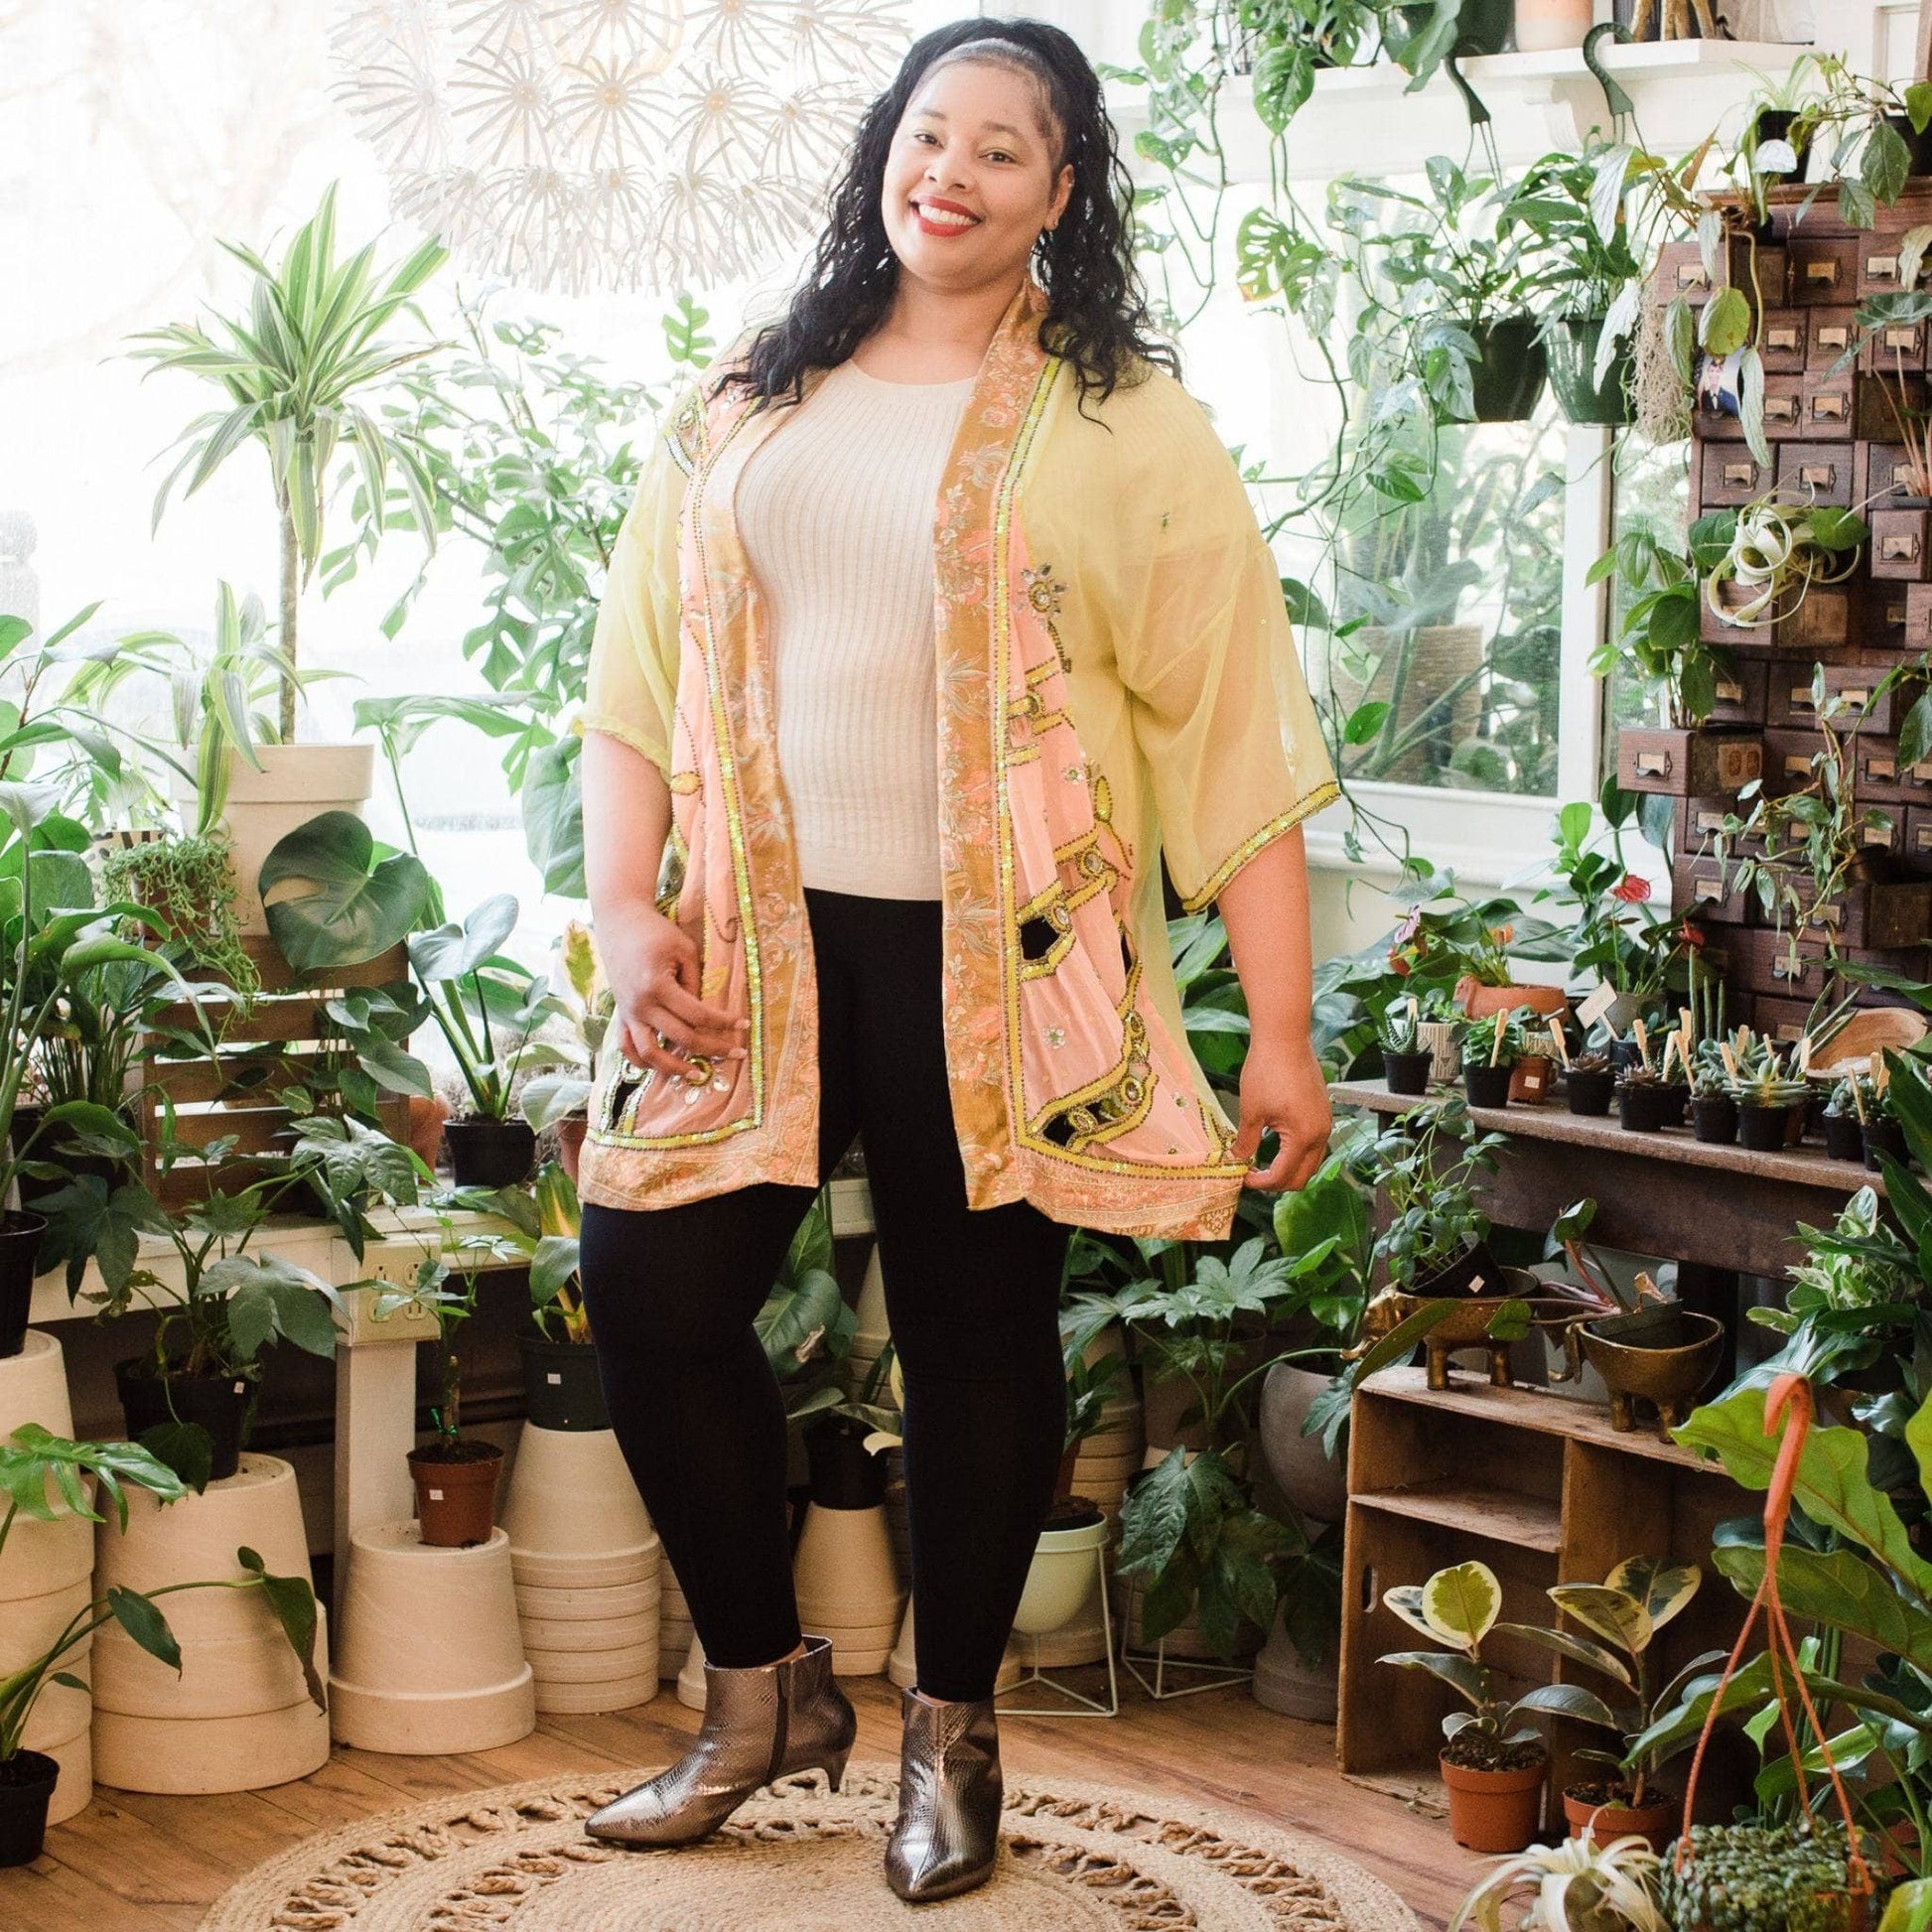 Model is wearing a light sheer yellow sophia silk duster while standing in front of potted plants.